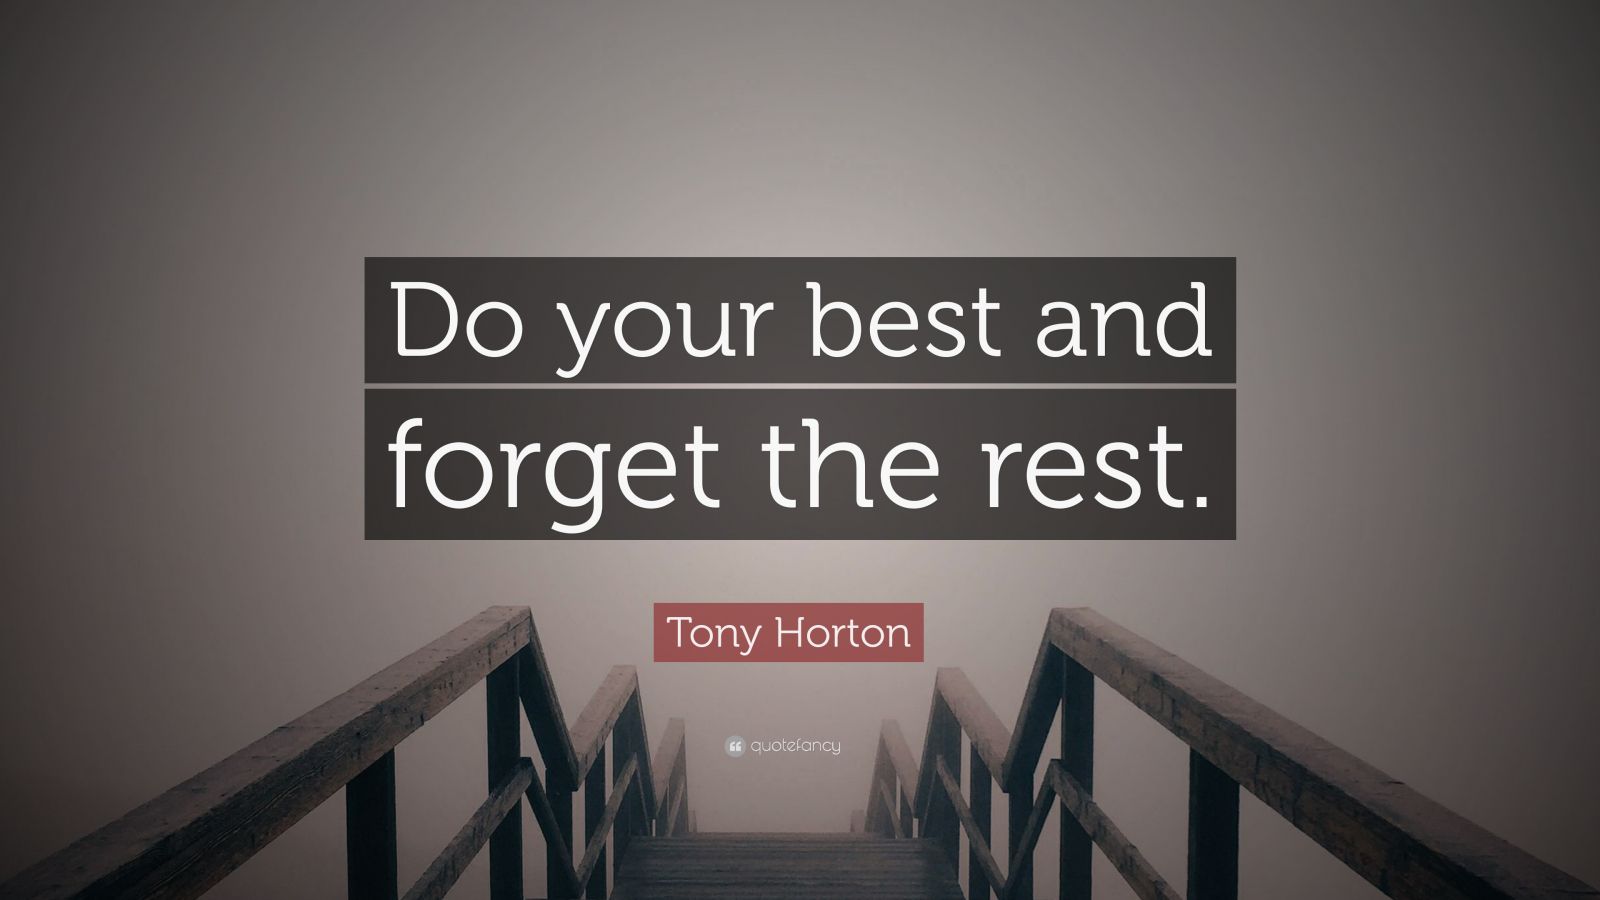 Tony Horton Quote: “Do your best and forget the rest.”